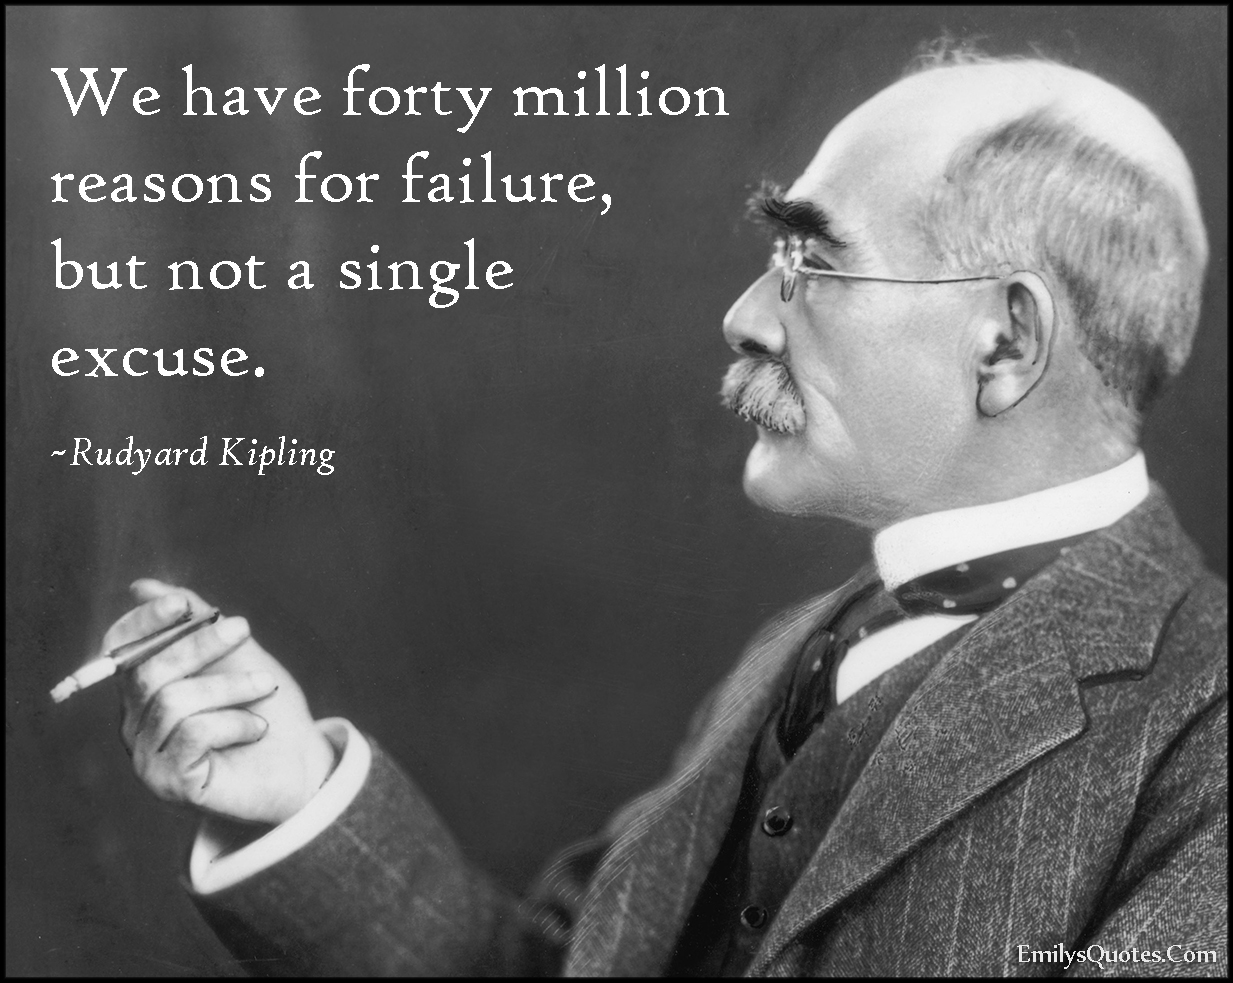 We have forty million reasons for failure, but not a single excuse